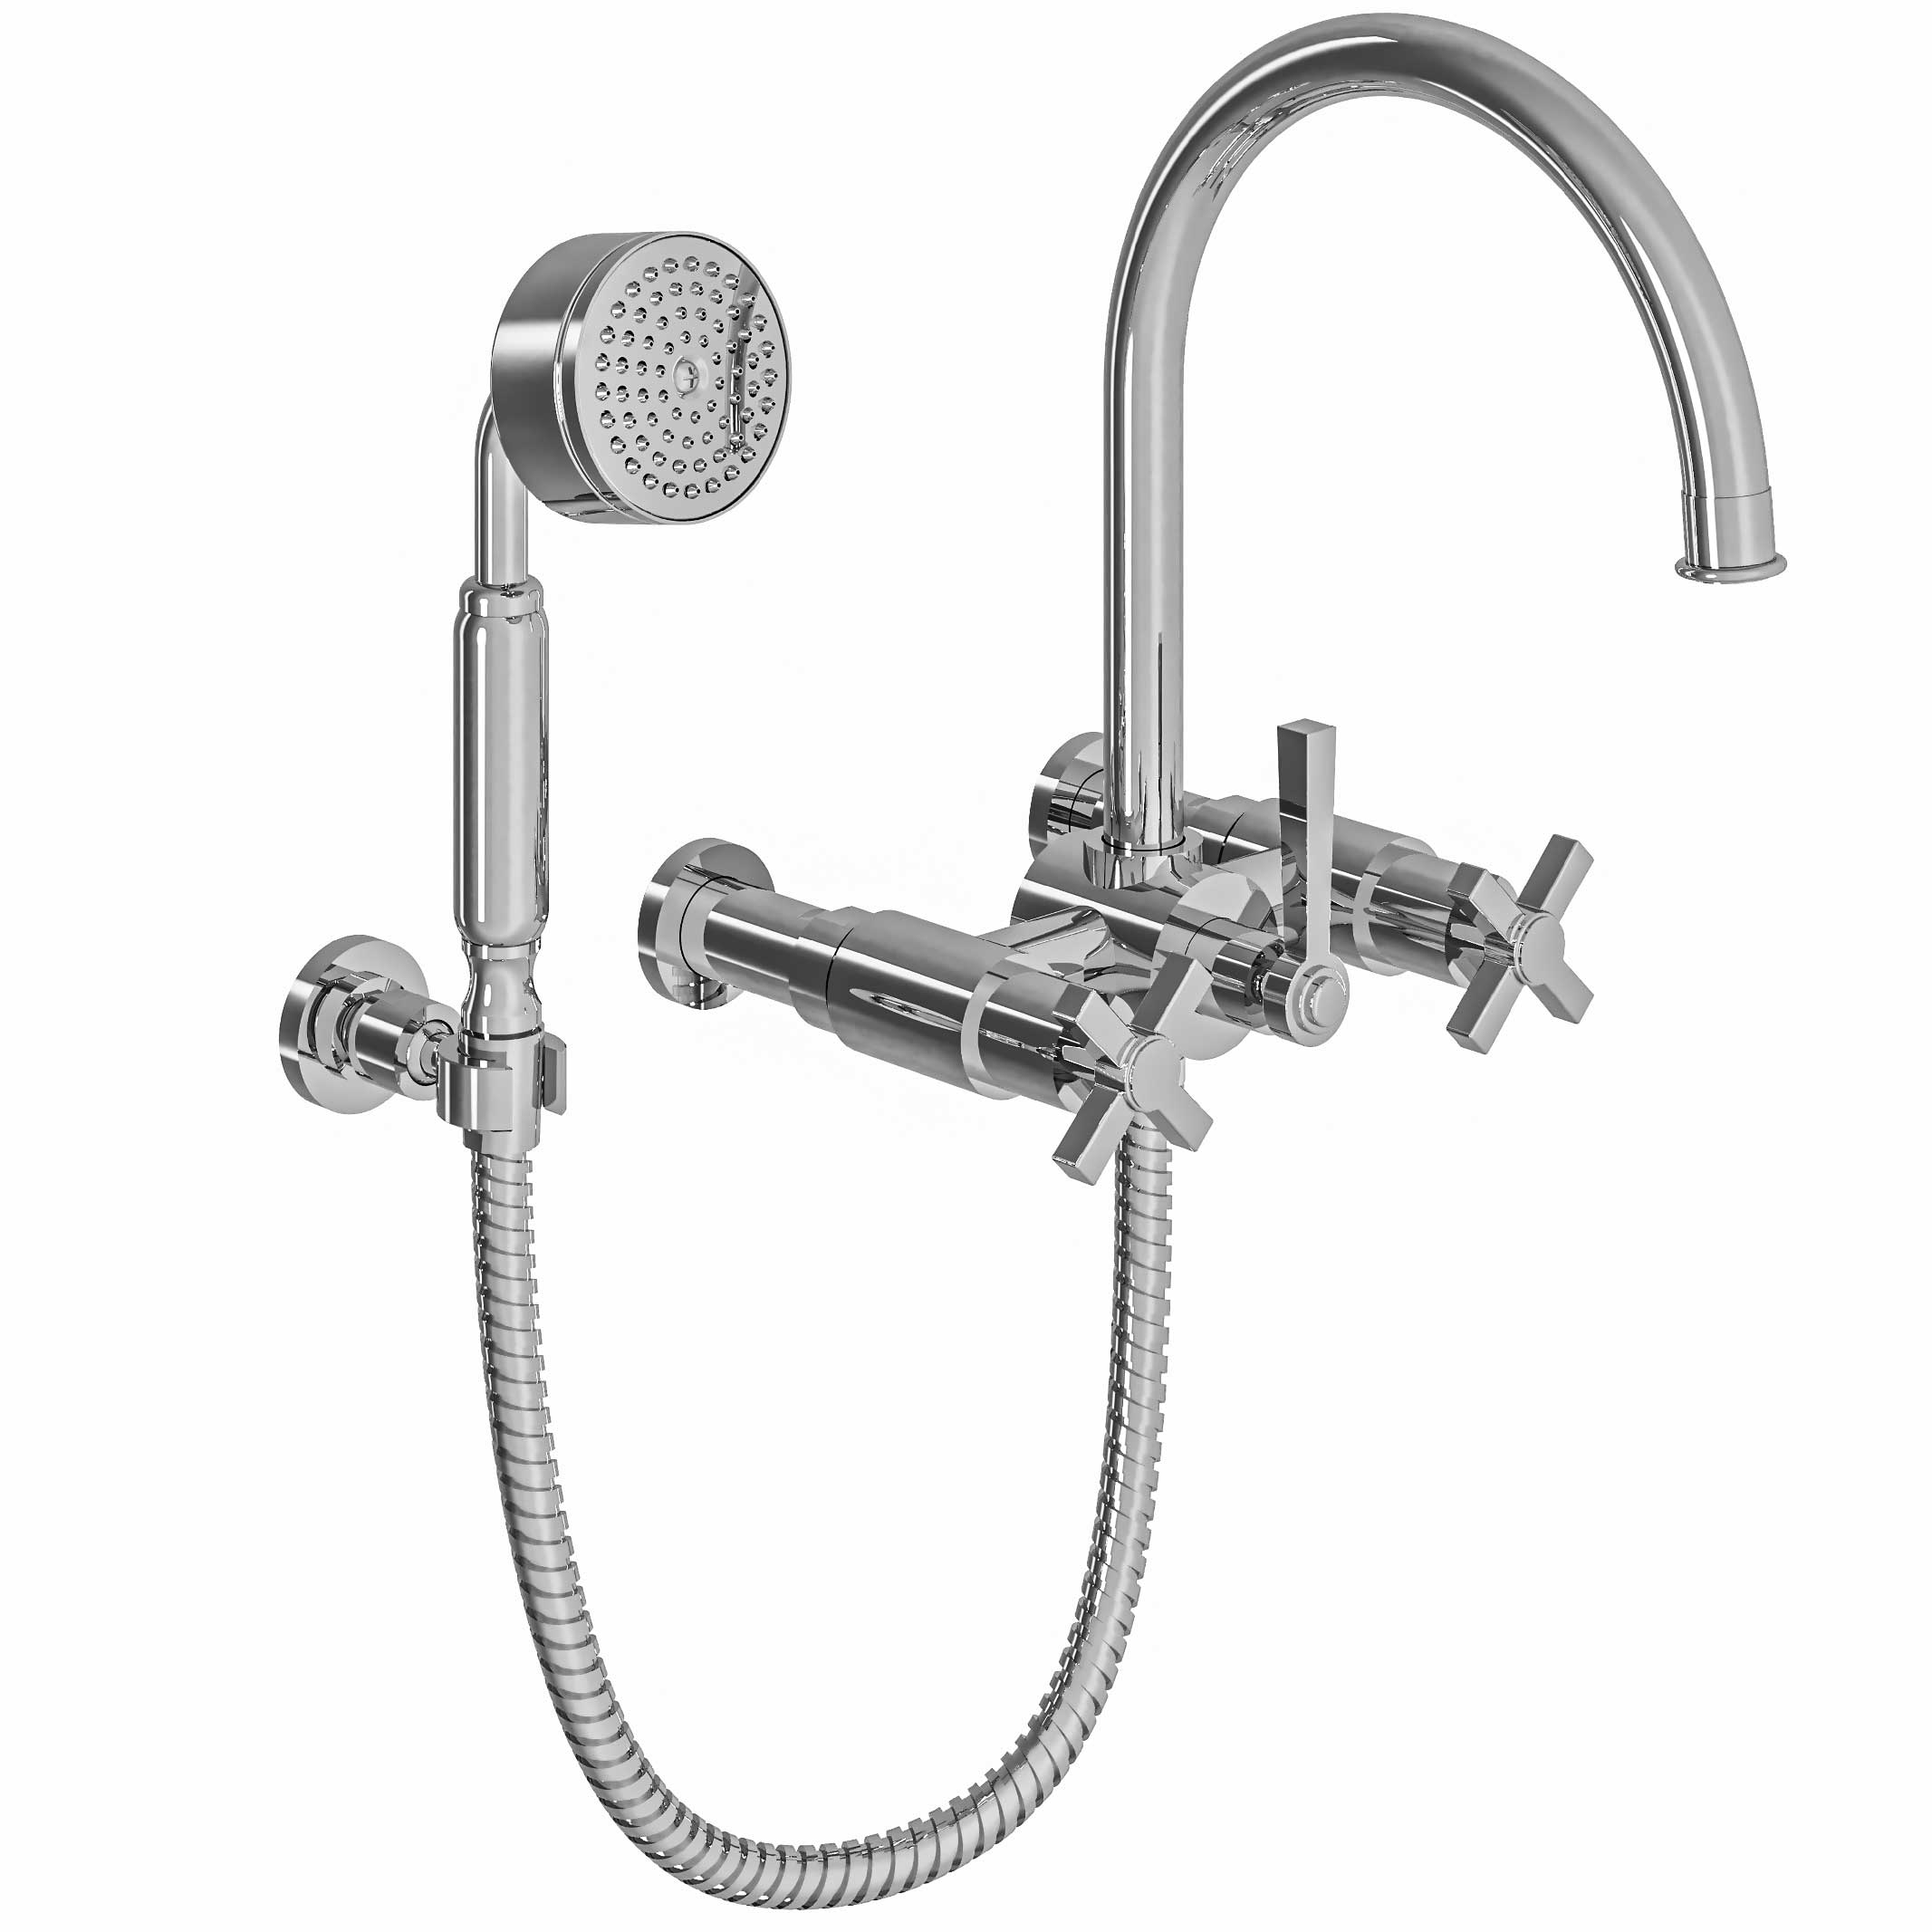 M60-3201 Wall mounted bath and shower mixer